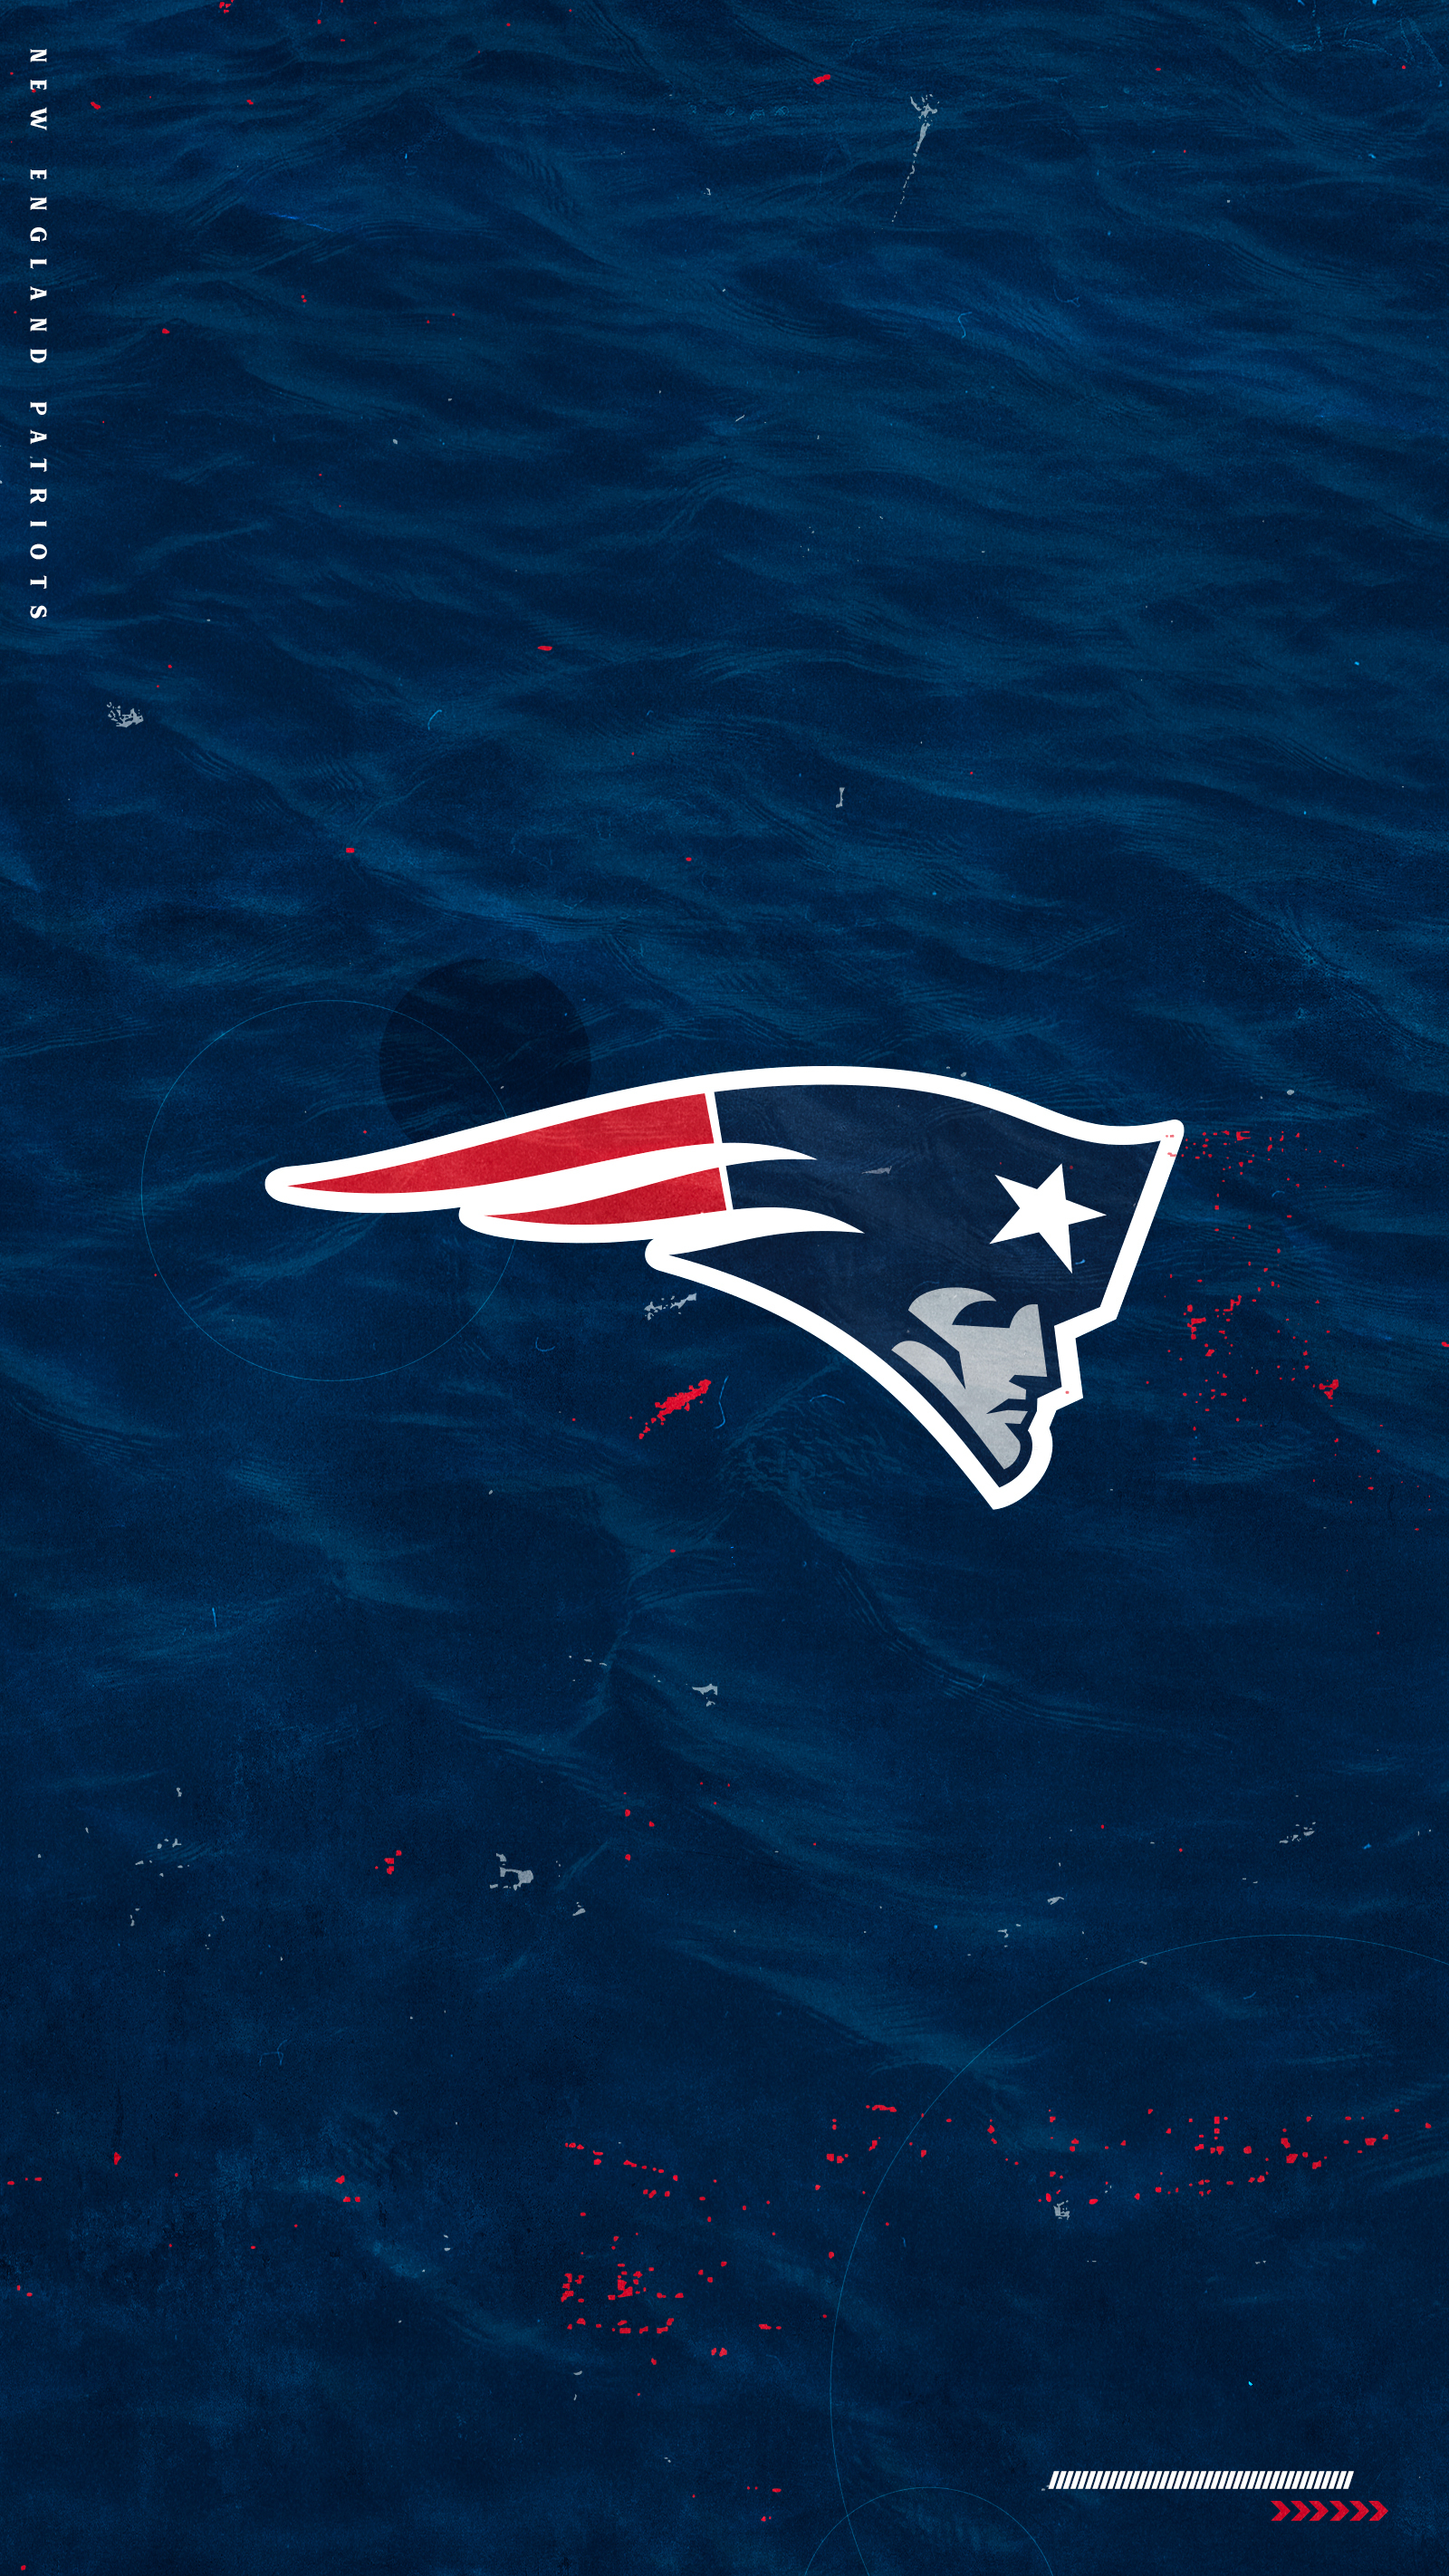 Official New England Patriots Mobile Wallpaper